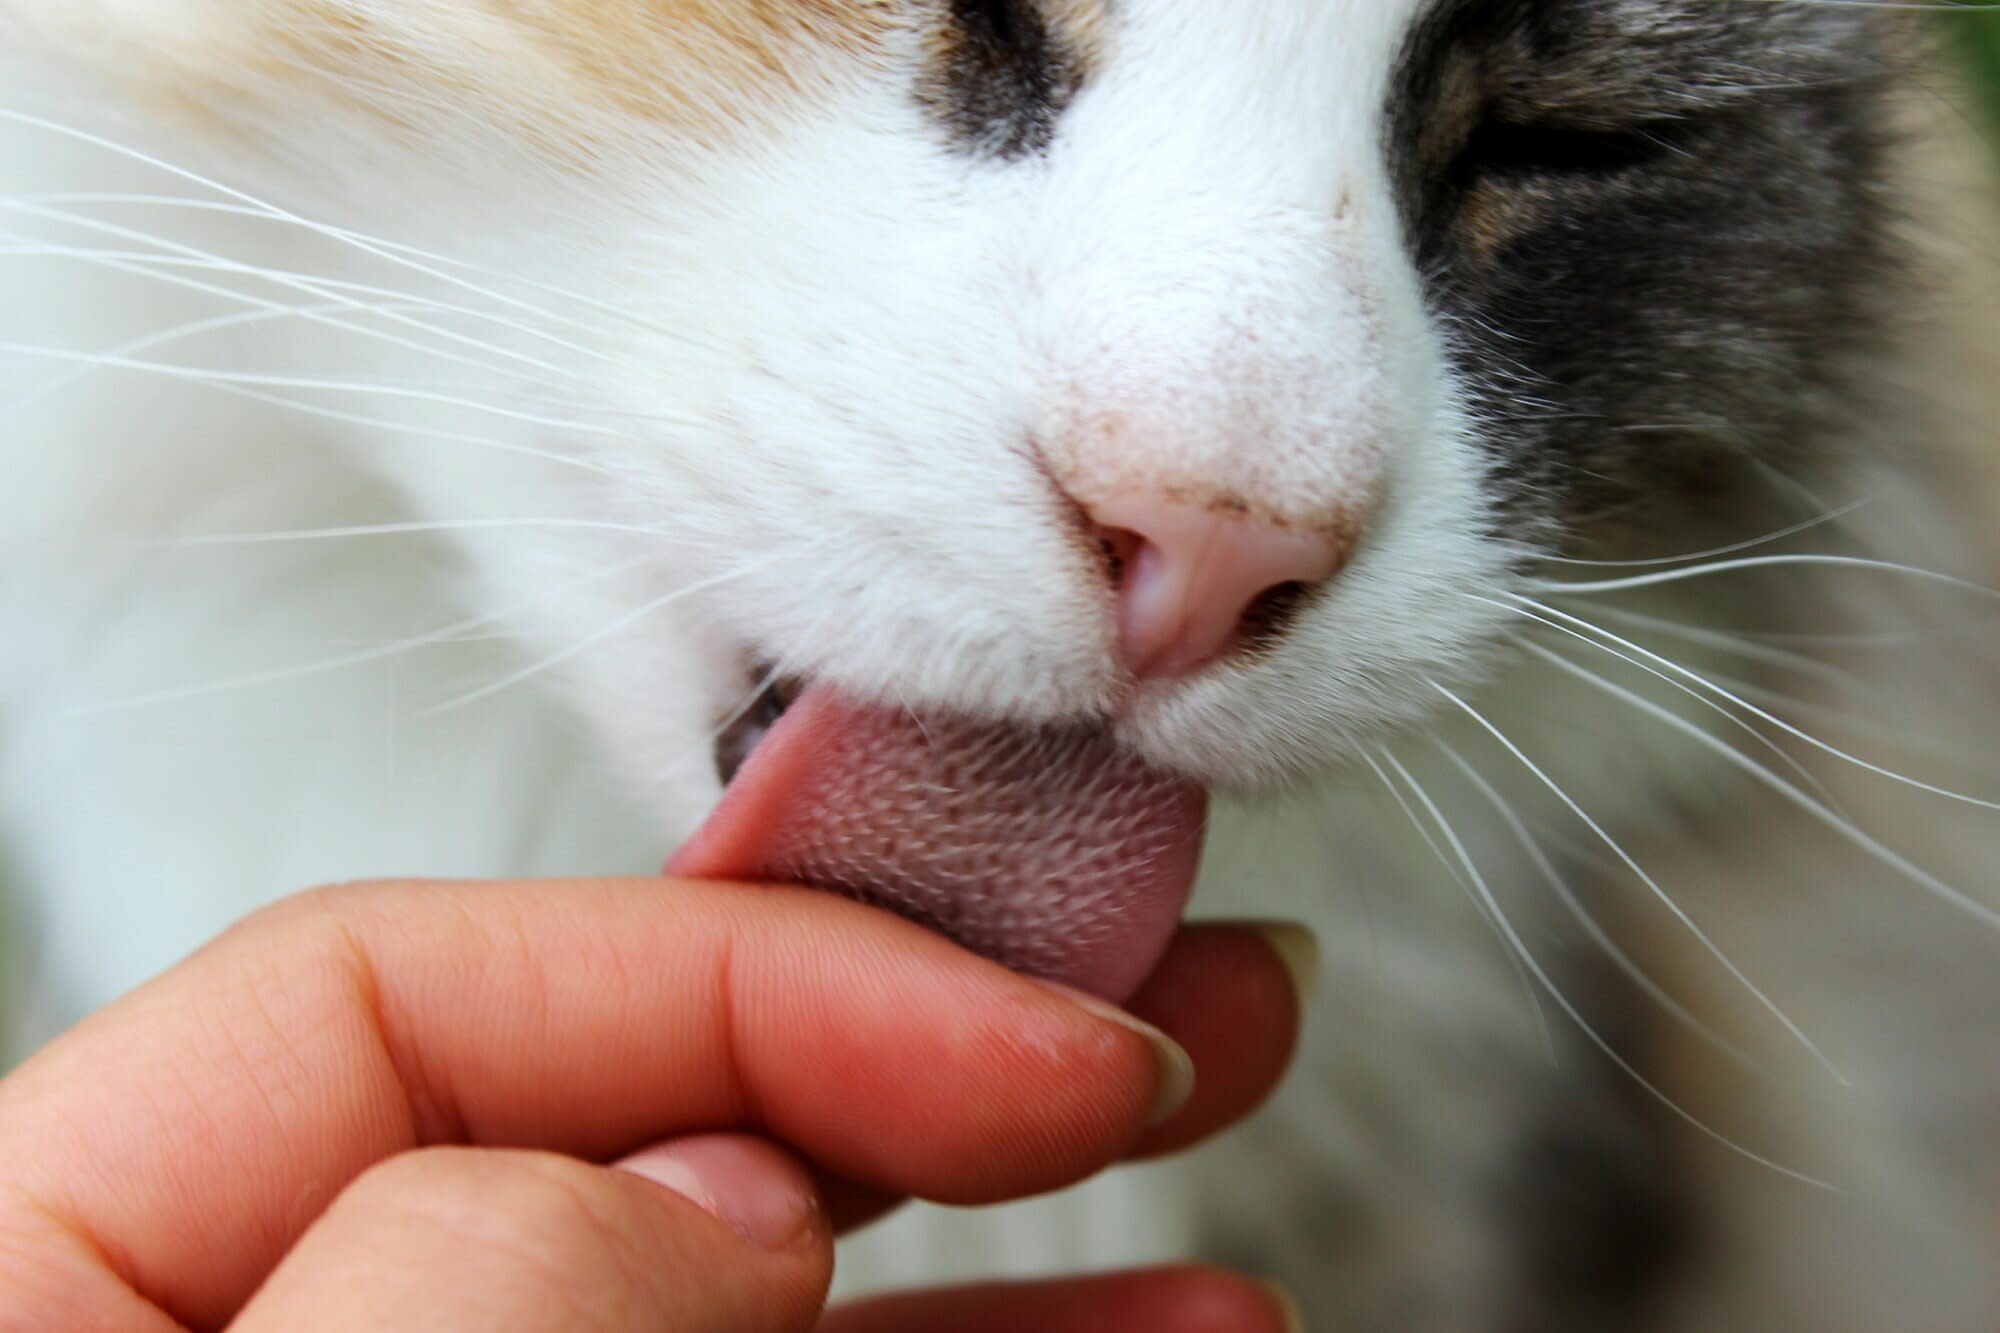 buttholes lick do Why cats their